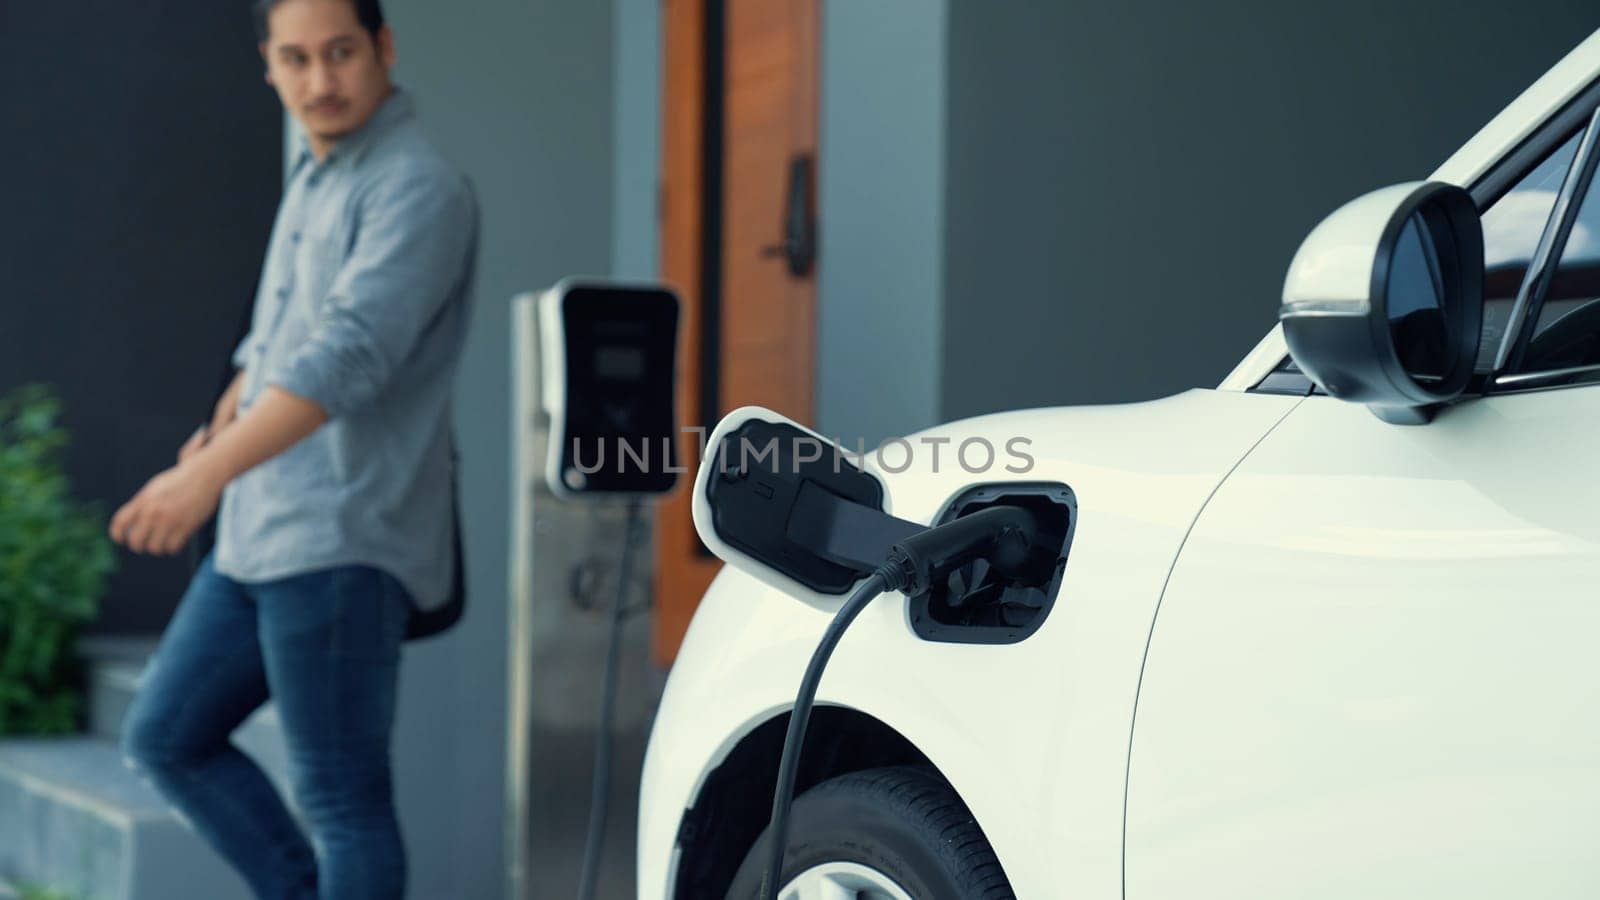 Progressive man unplugs the electric vehicle's charger at his residence. by biancoblue